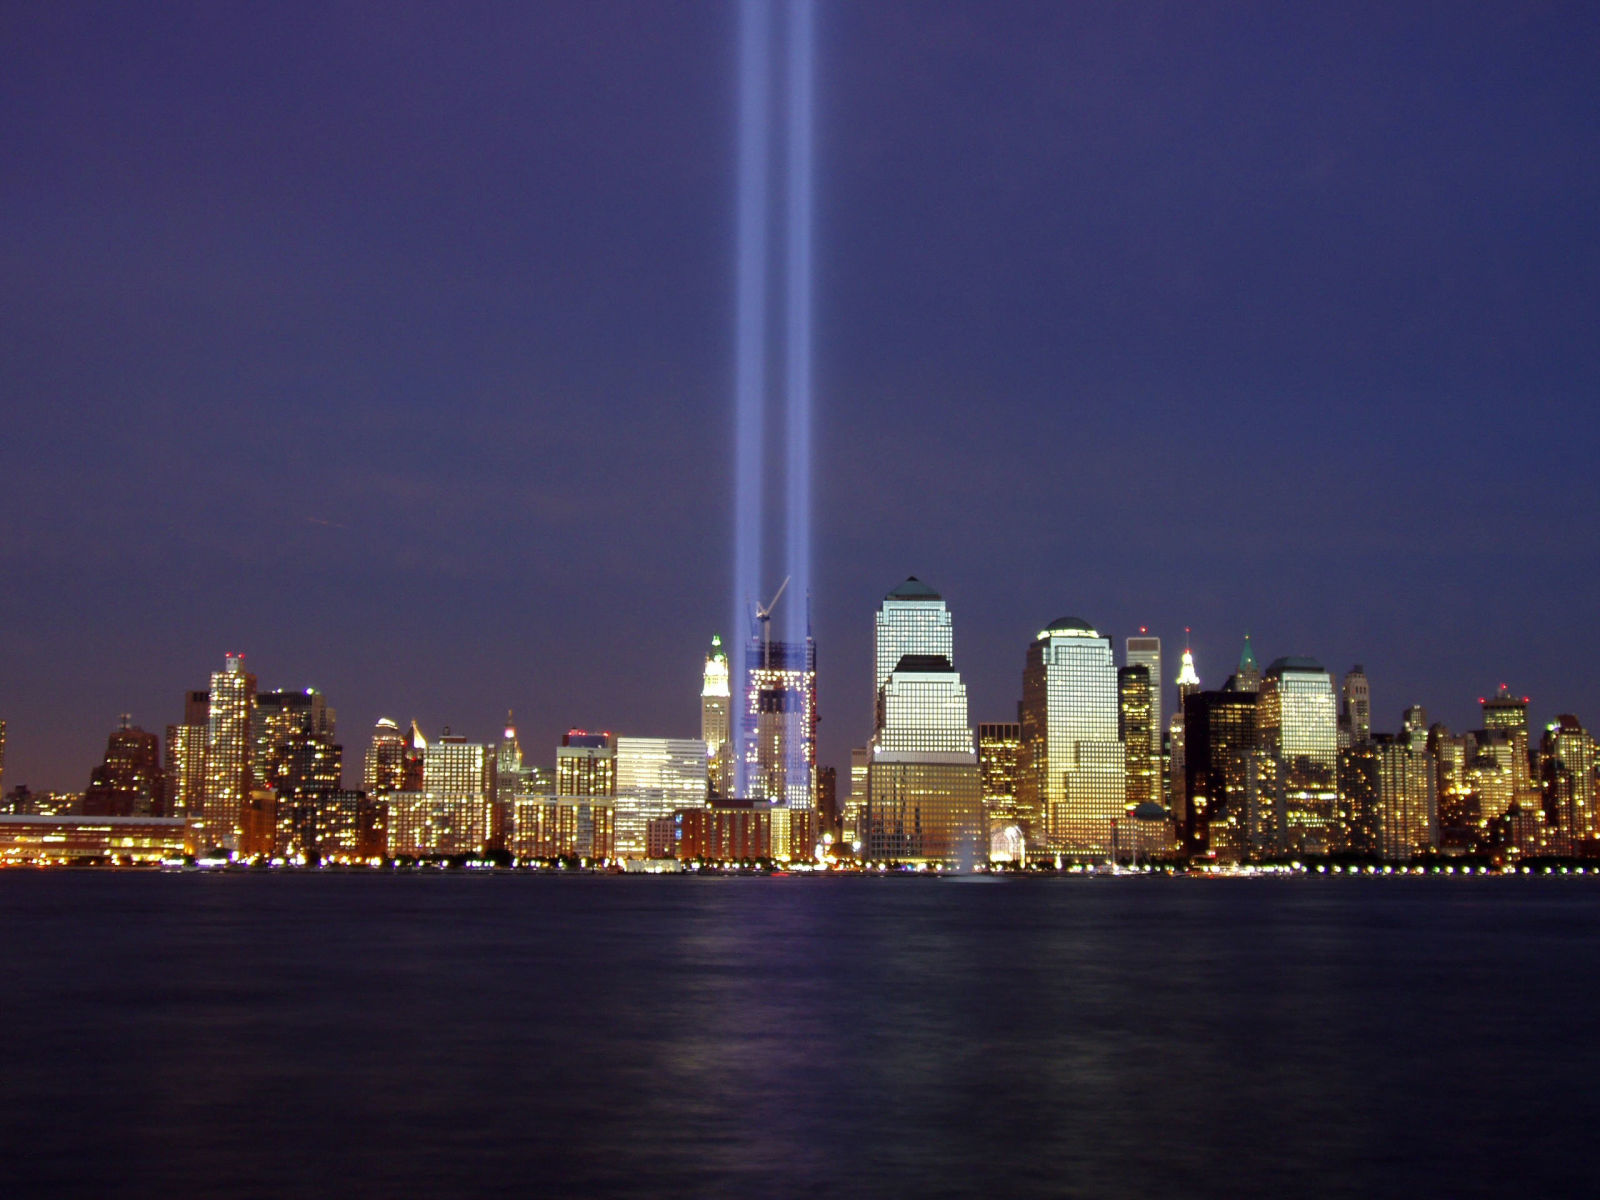 Two beams of light represent the former Twin Towers of the World Trade Center during the 2004 memorial of the September 11, 2001 attacks.